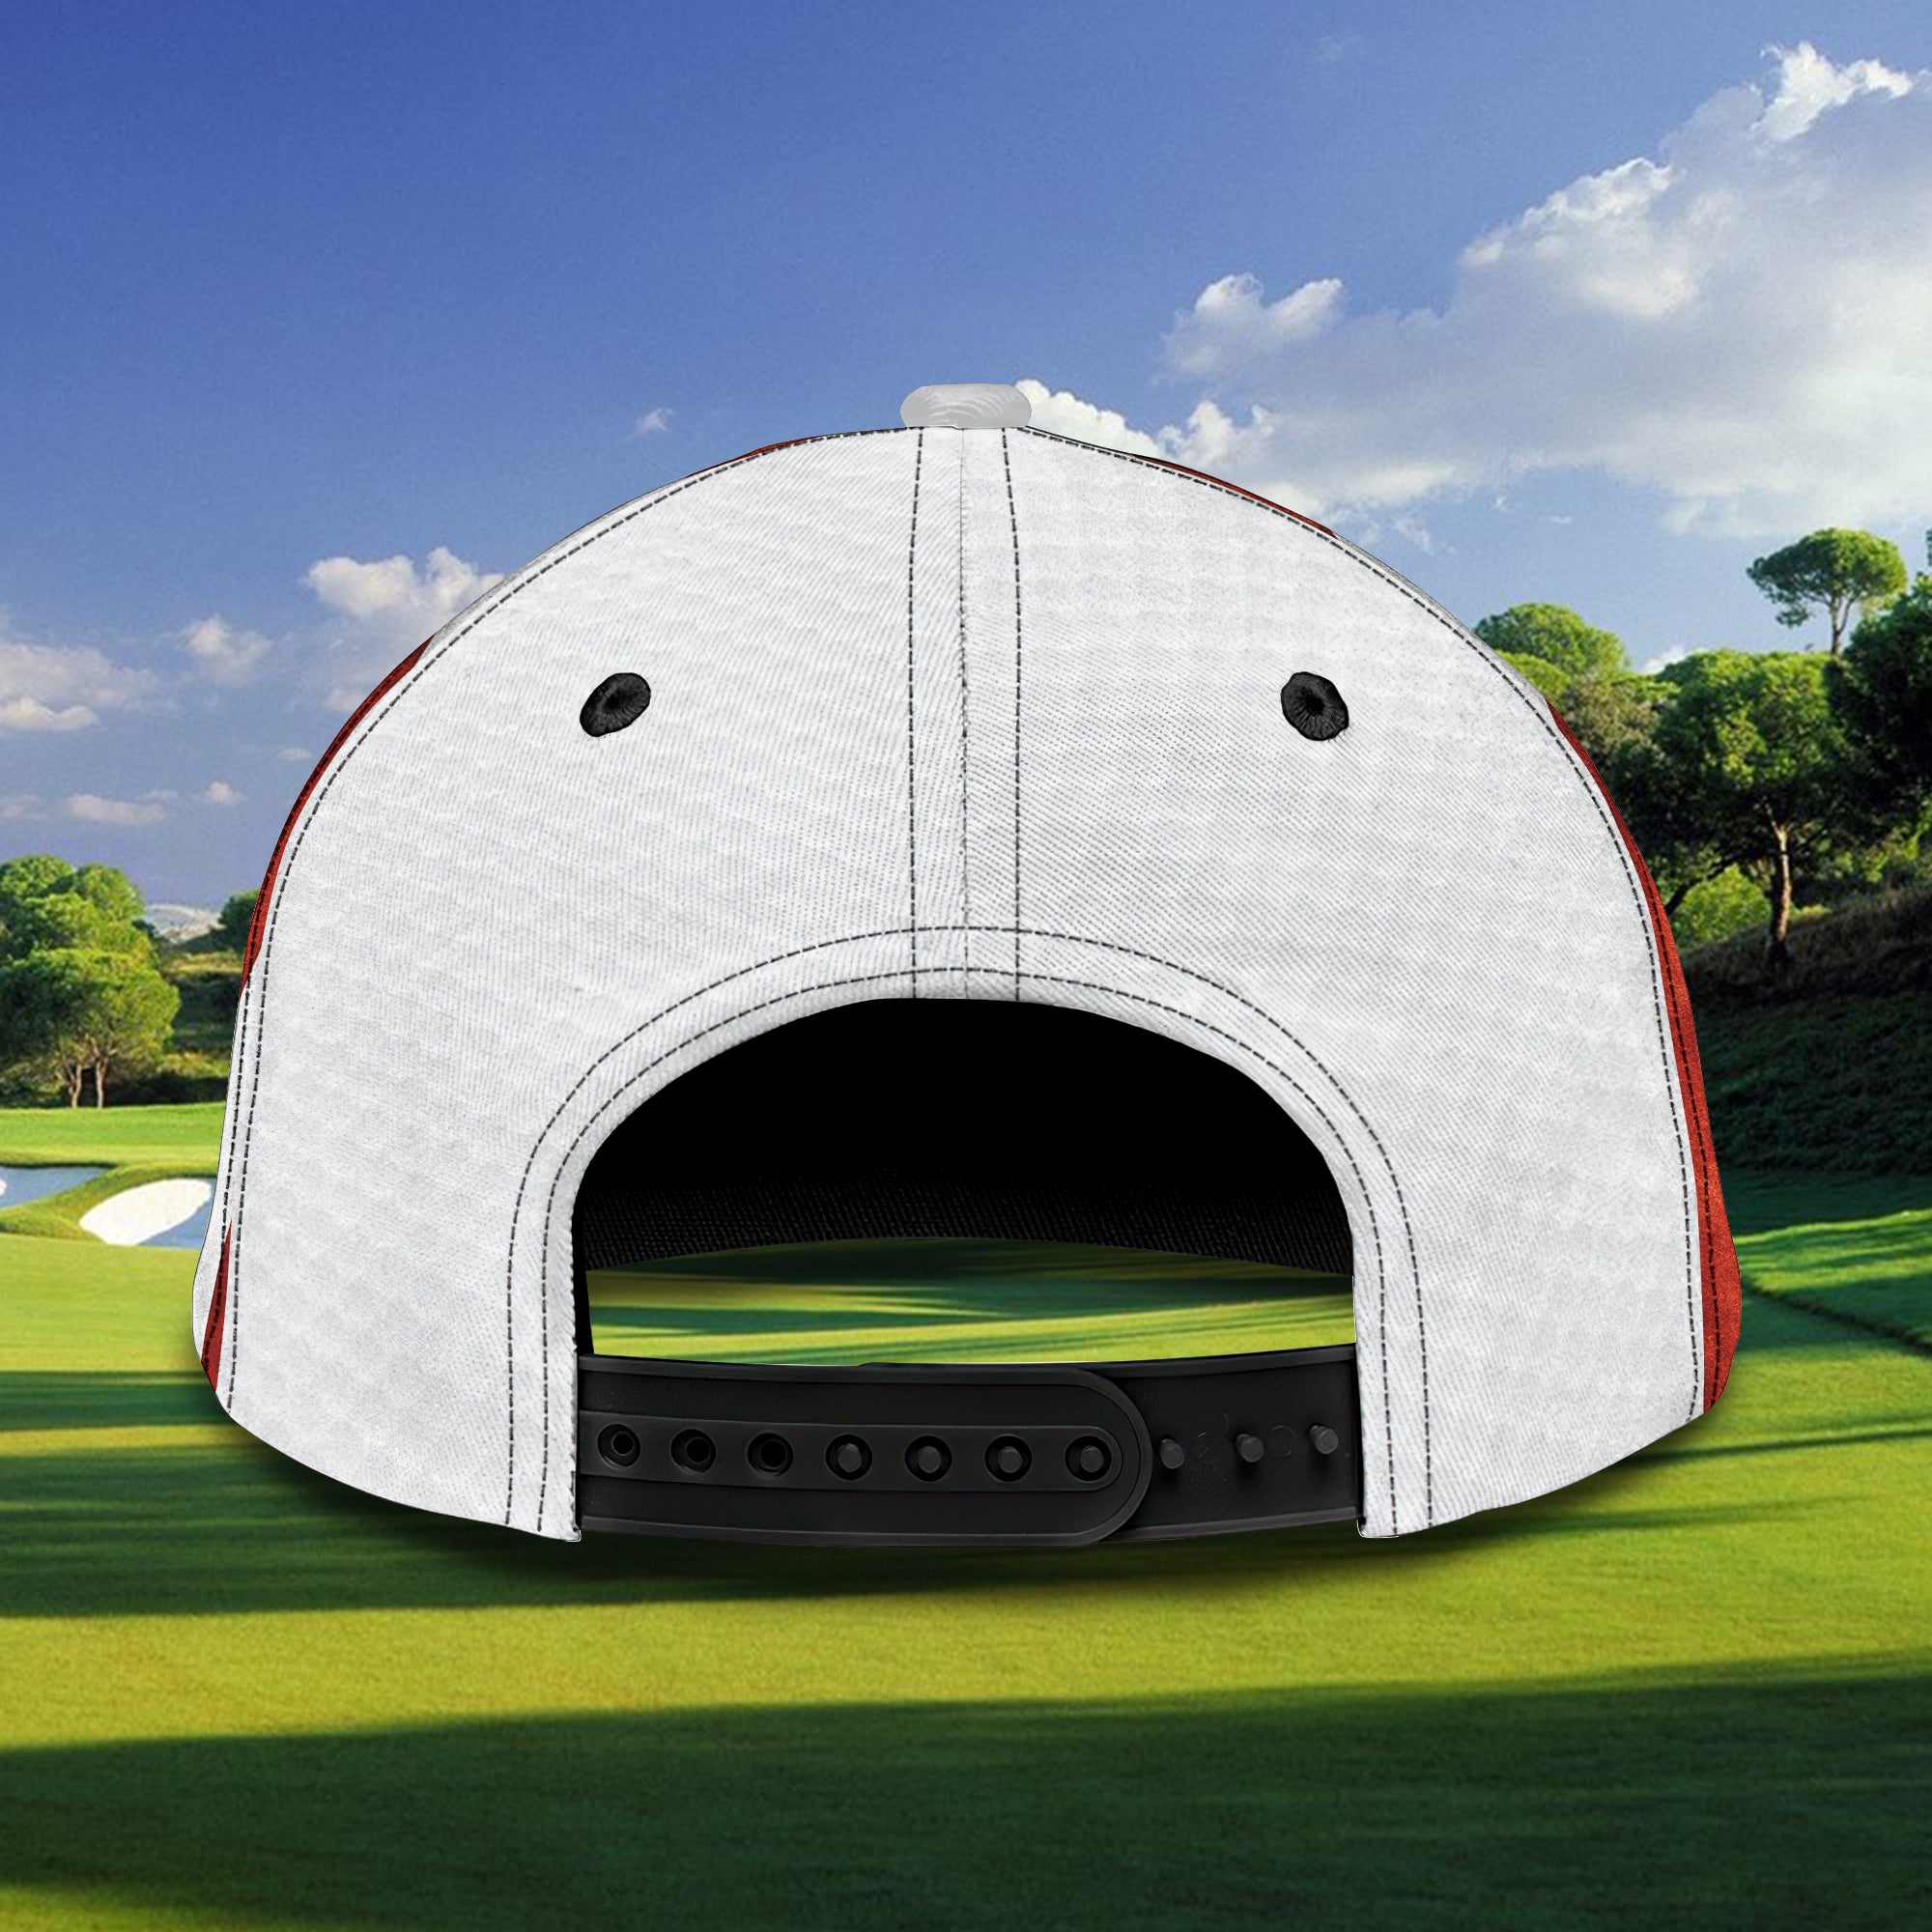 Golf - Personalized Name Cap - Tt99-110- free shipping